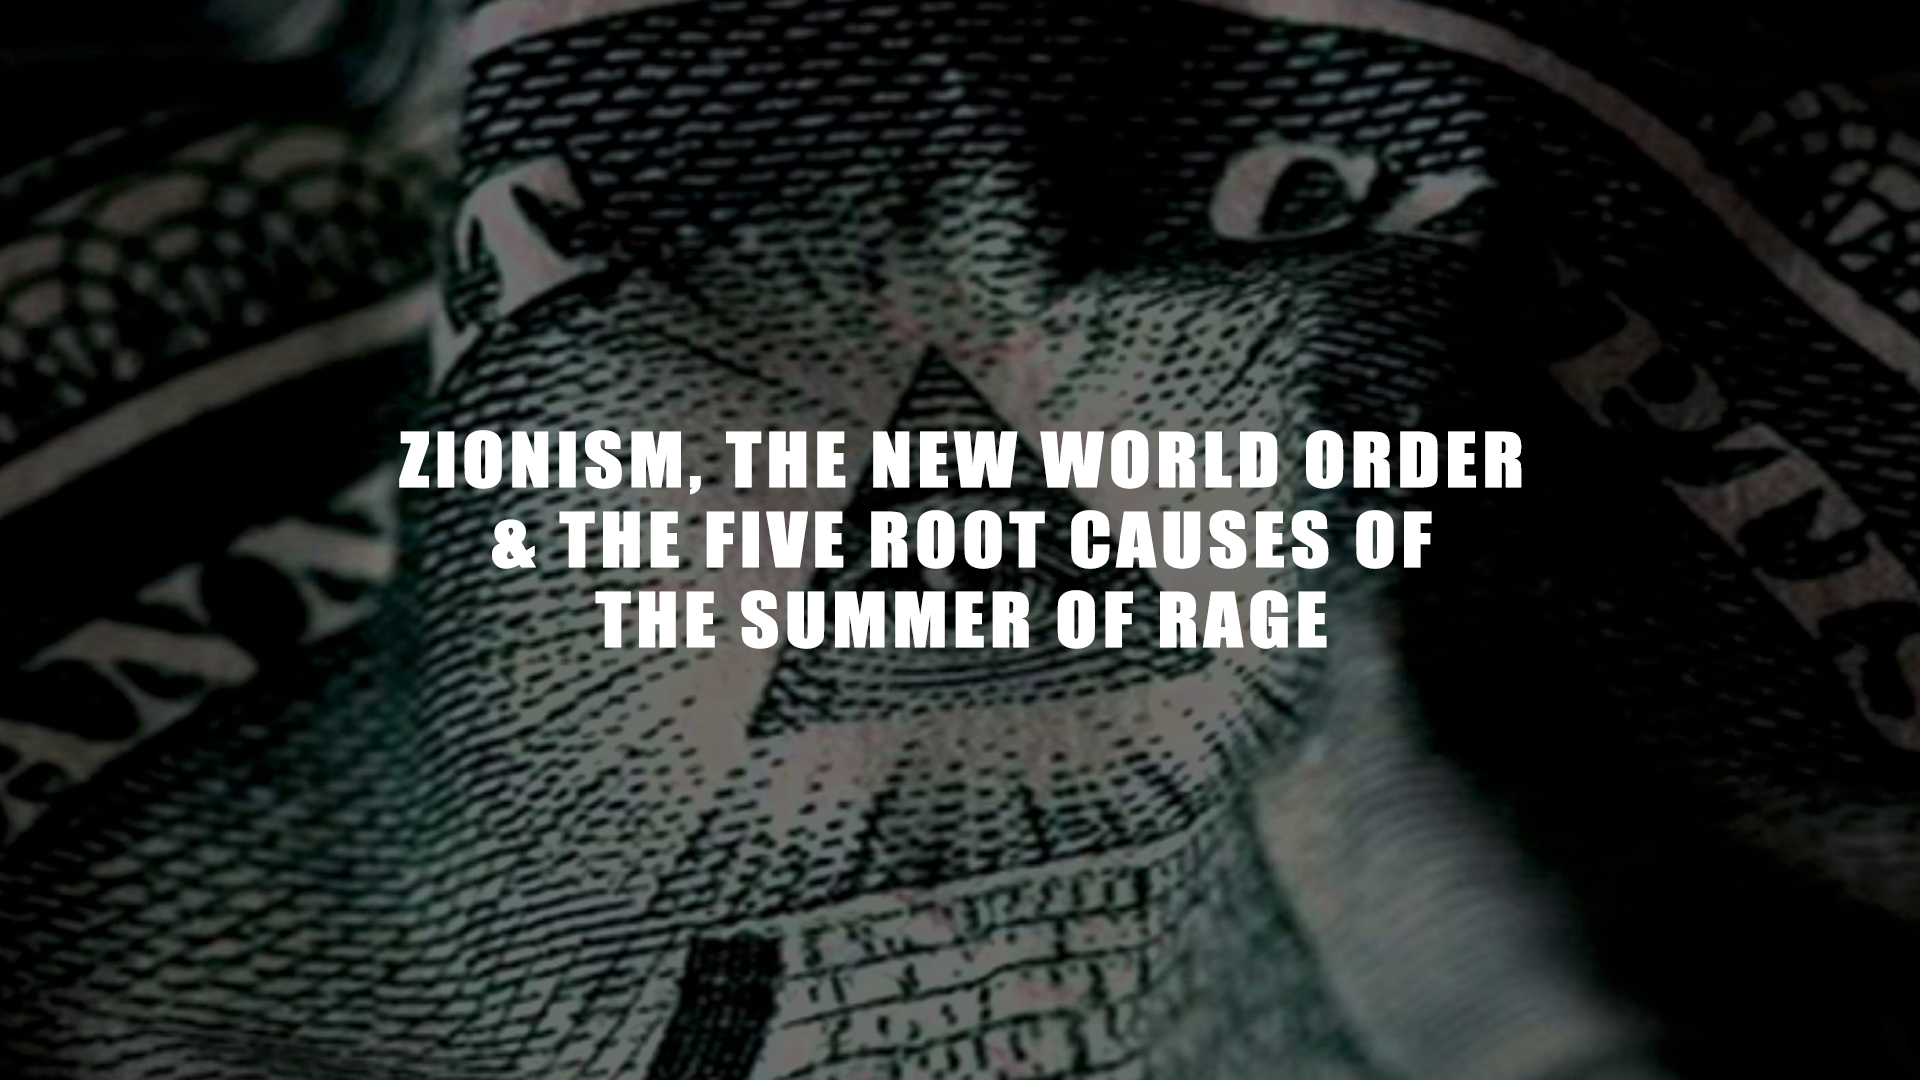 Zionism-the-New-World-Order-the-Five-Root-Causes-of-the-Summer-of-Rage-16x9.png